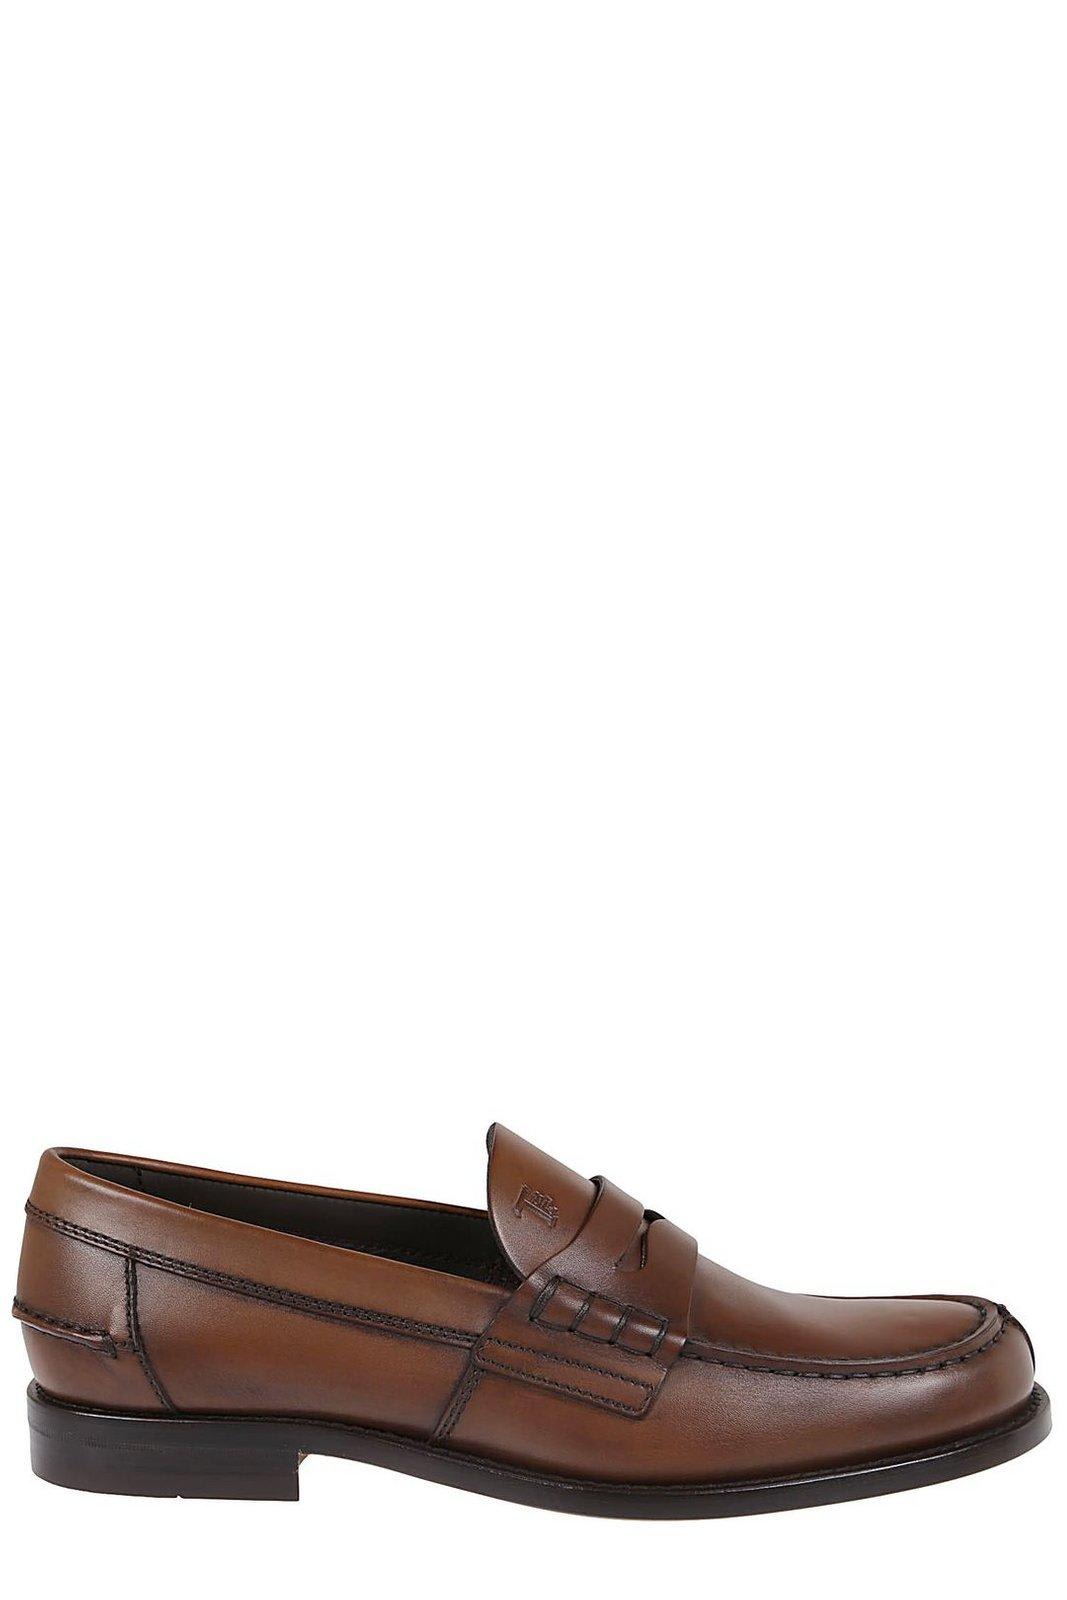 TOD'S PENNY BAR MOCCASINS